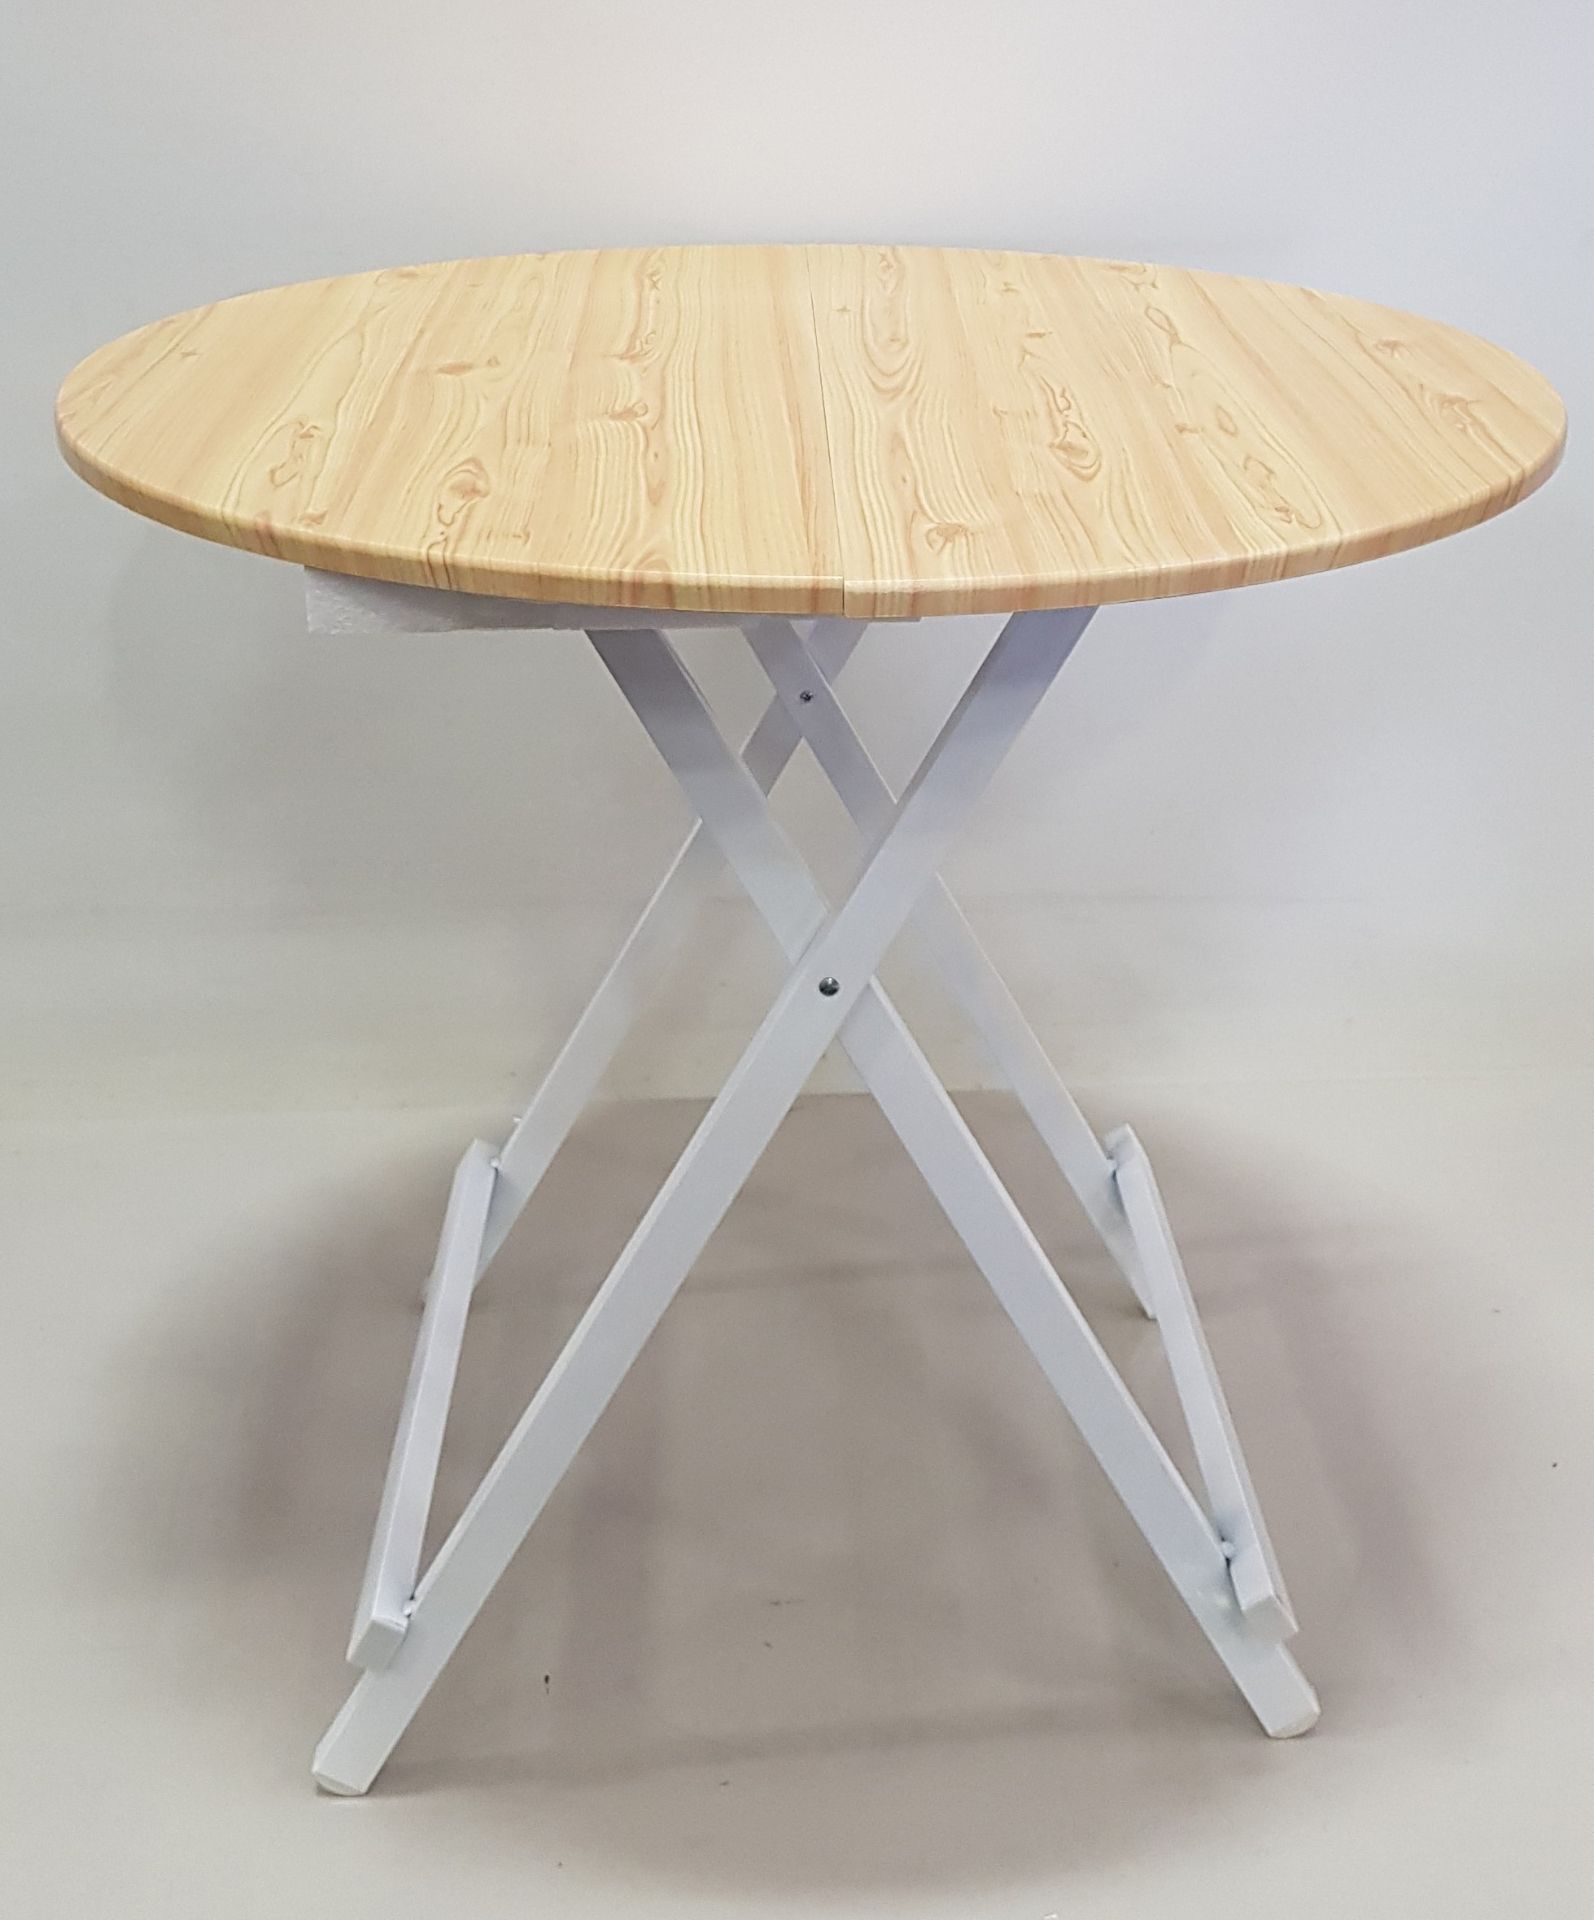 5 X LIGHT OAK COLOURED CIRCLE TABLES SIZE - 80CM DIAMETER - (NOTE: FACTORY SECONDS SOME VENEER MAY